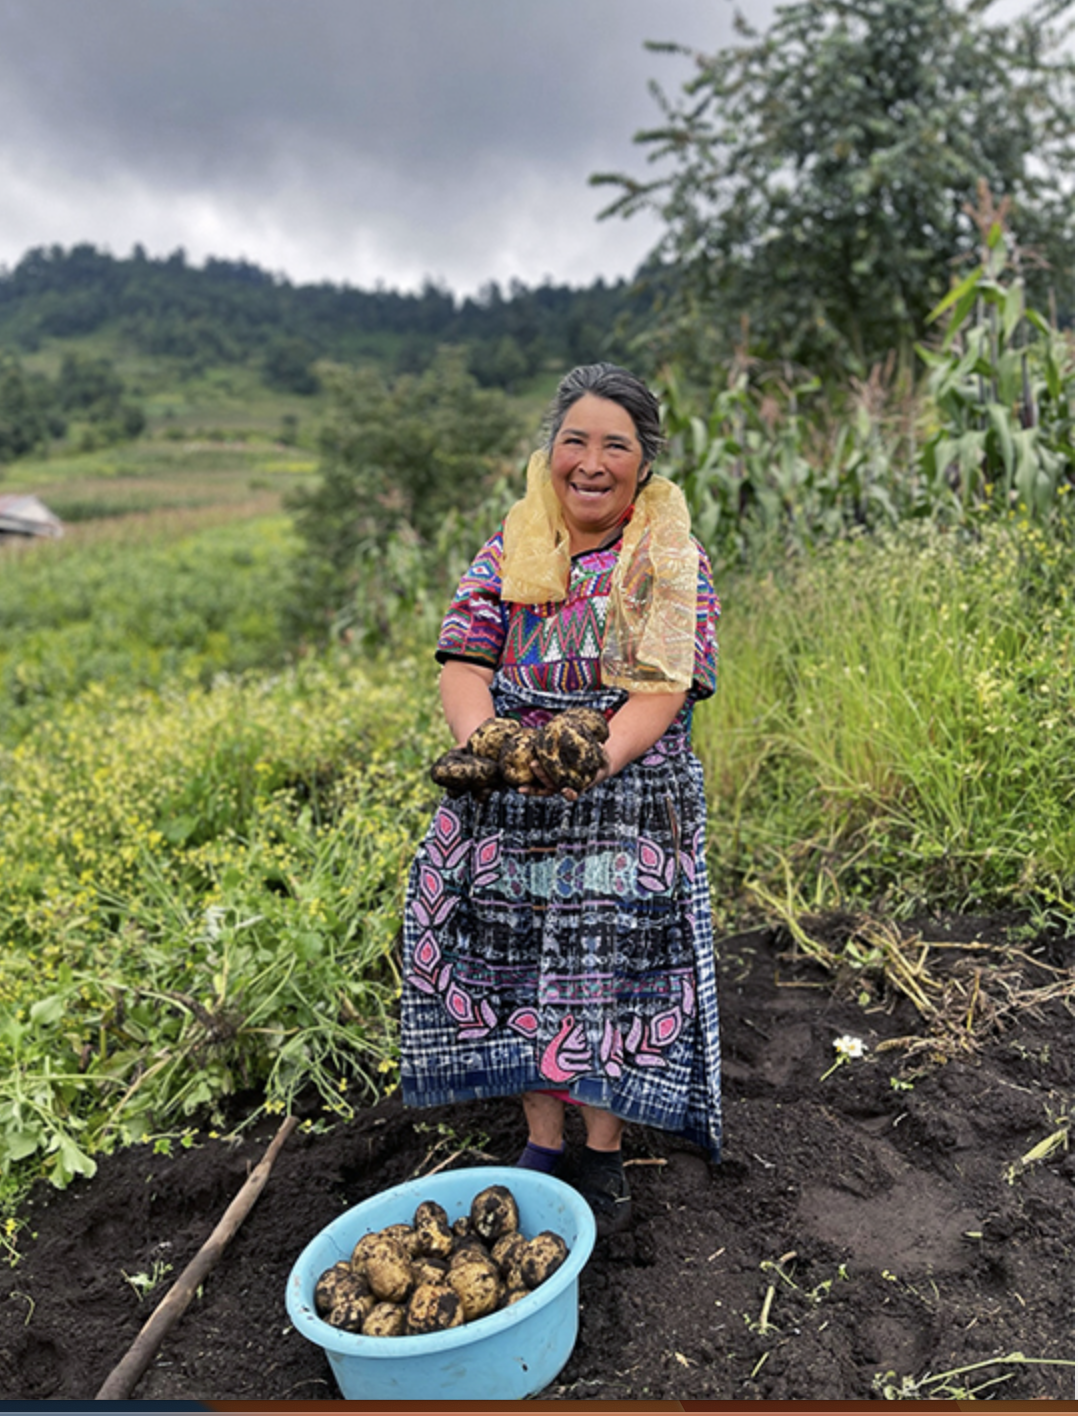 Florinda Dominga Par is an active participant in the agroecological and artisanal market held every Friday in Totonicapán, a space generated specifically for agroecological producers. She is considered one of the best producers of organic potatoes in the country. Image courtesy of Utz Che’.